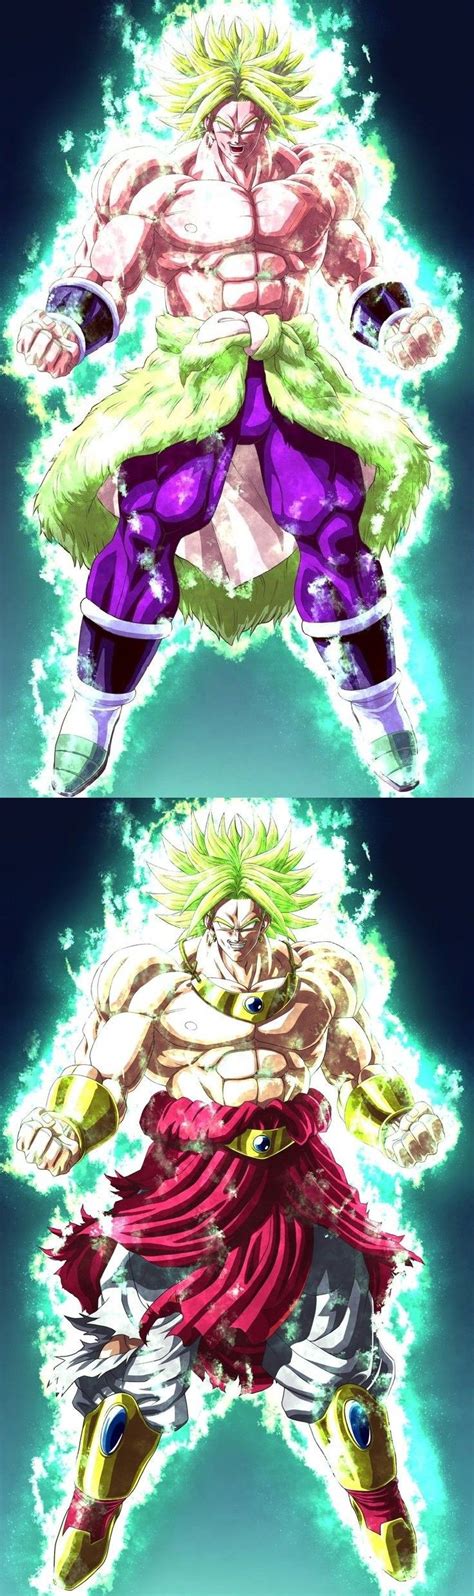 Broly ratchets up the power scale to such a degree that near the end of the conflict broly and gogeta nearly break the universe. Broly 2018 | Broly 1993 | Dbz wallpapers, Anime